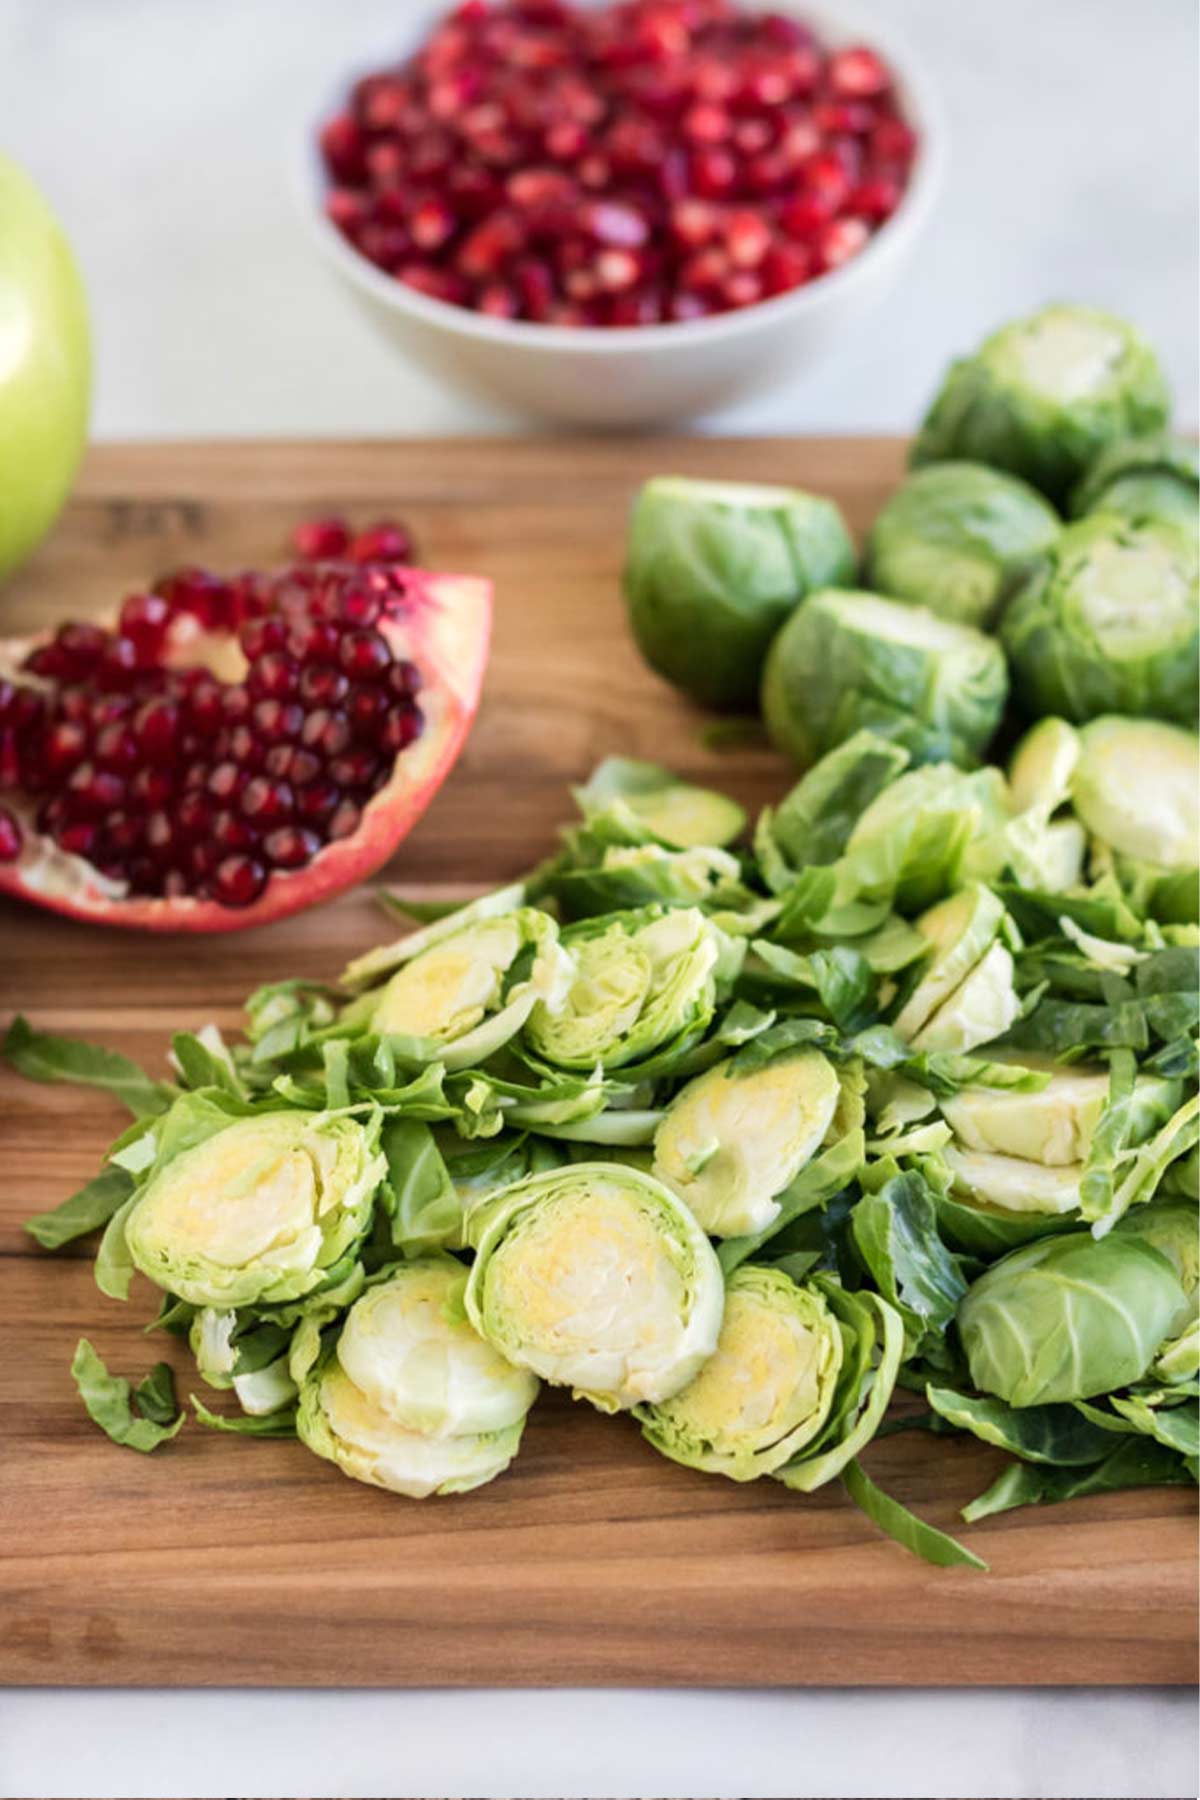 Ingredients to make a salad with brussel sprouts on a cutting board.